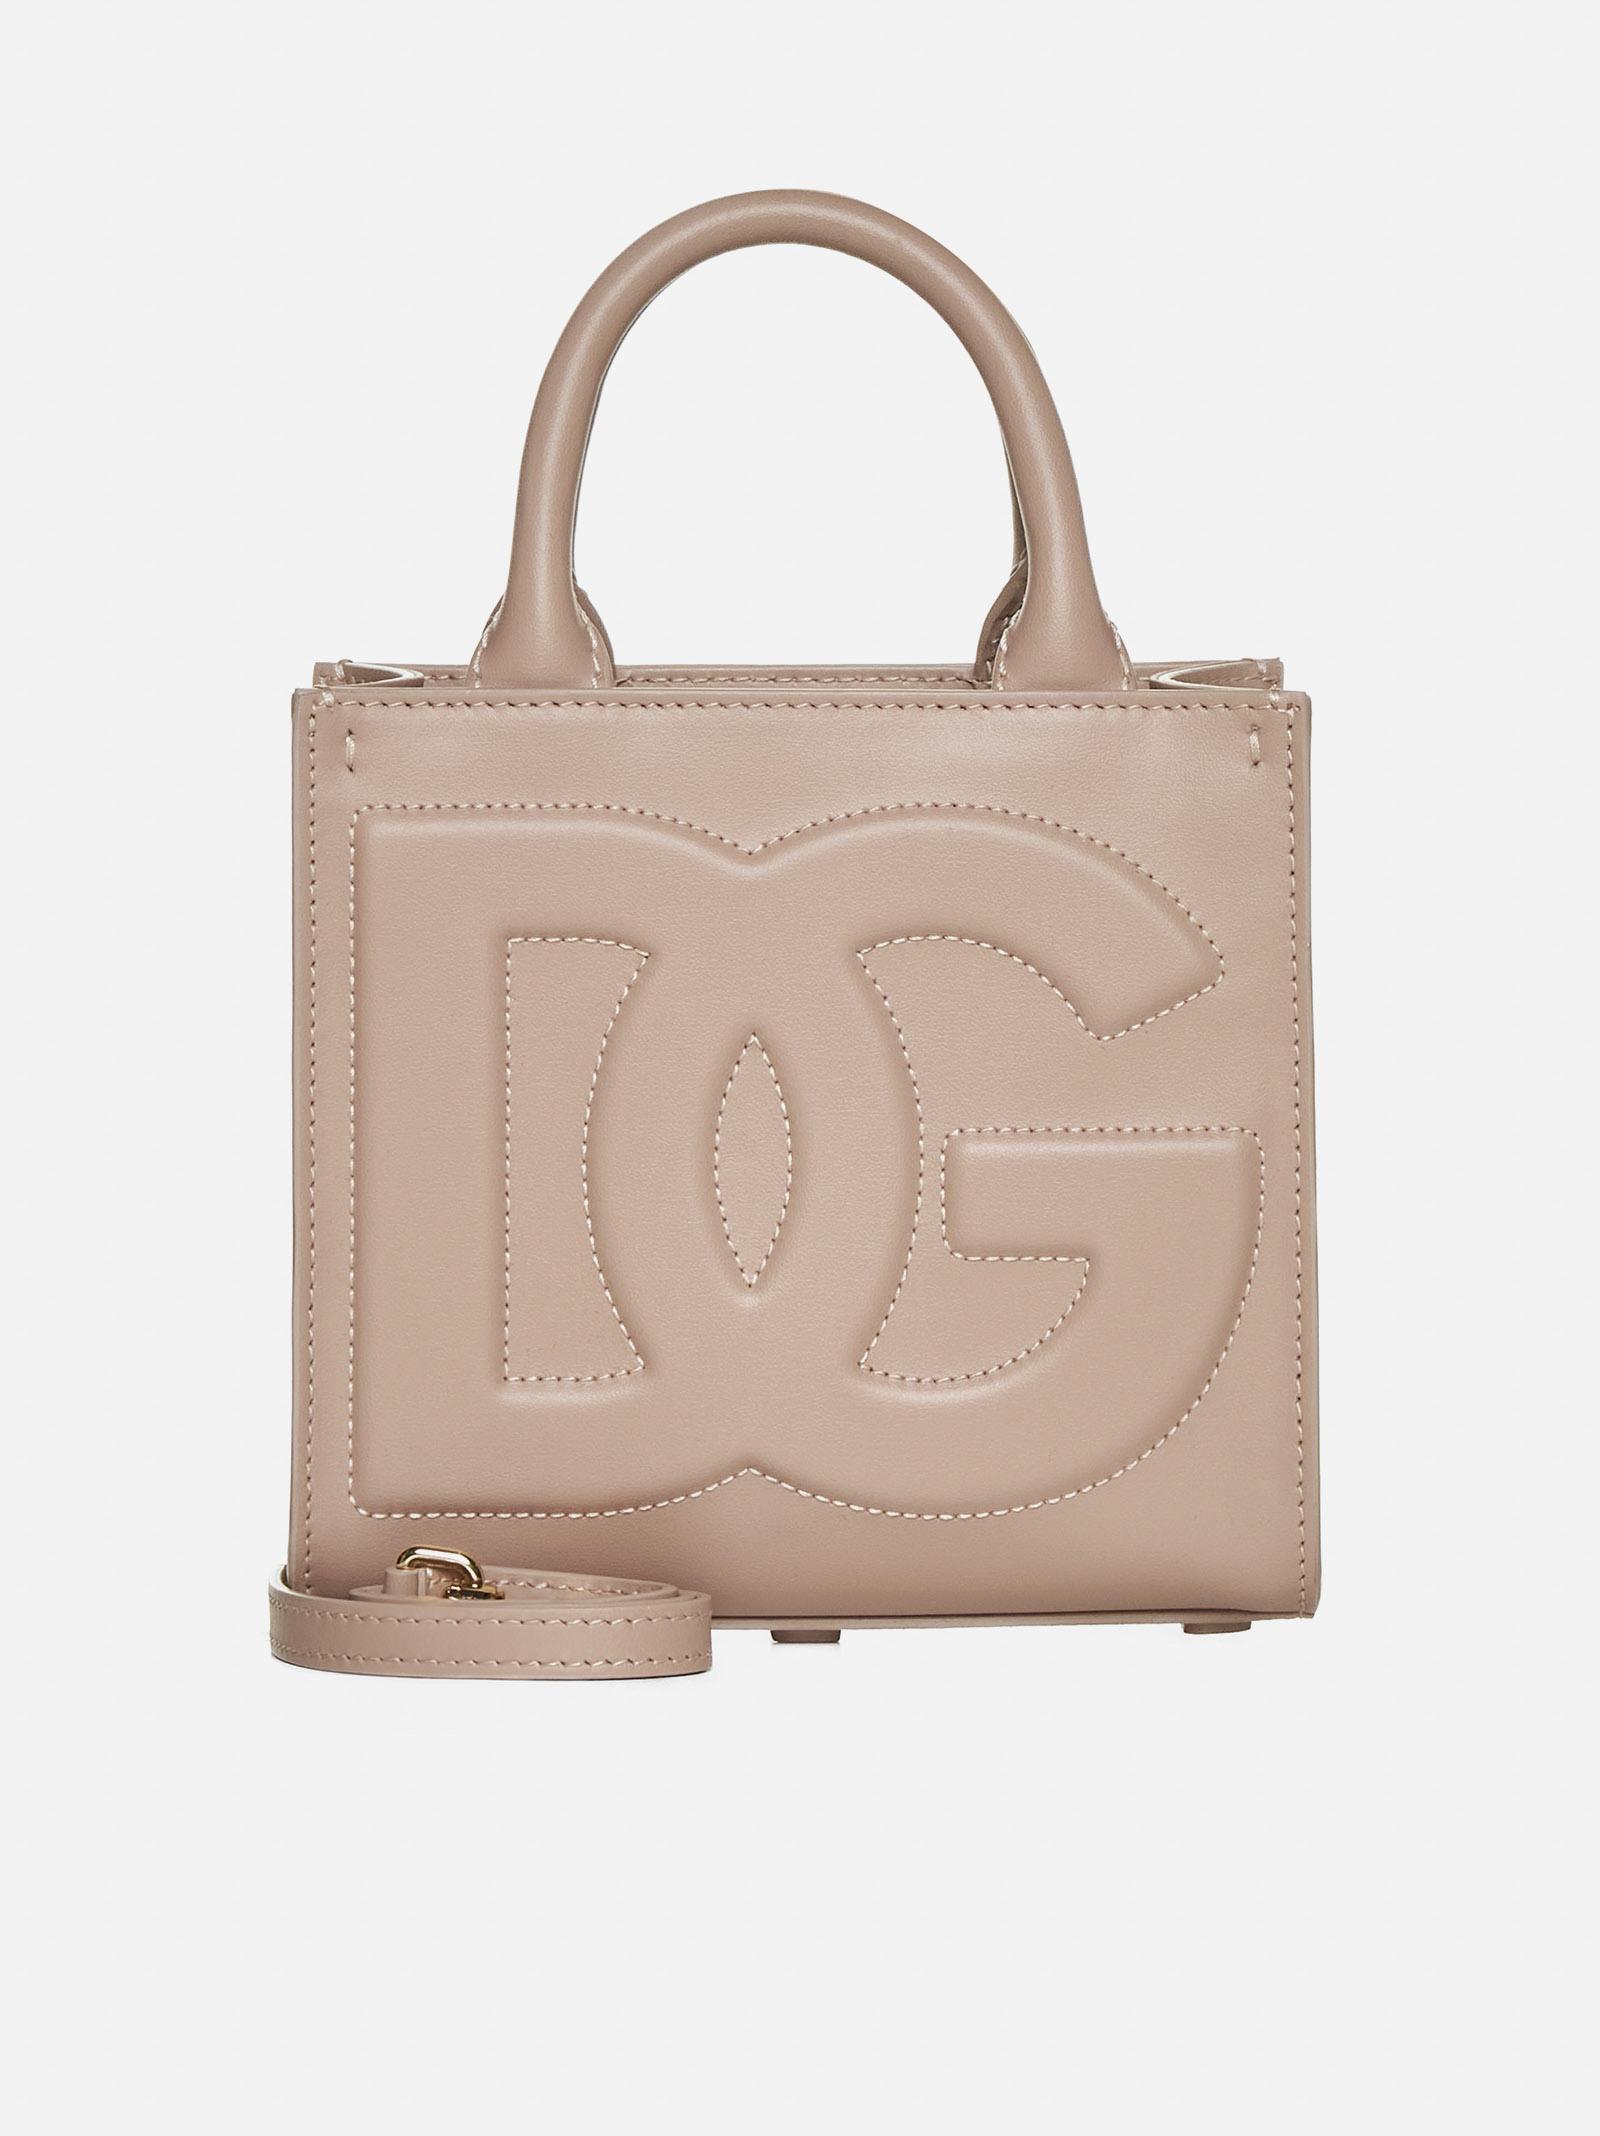 Dolce & Gabbana Dg Daily Leather Small Tote Bag in Natural